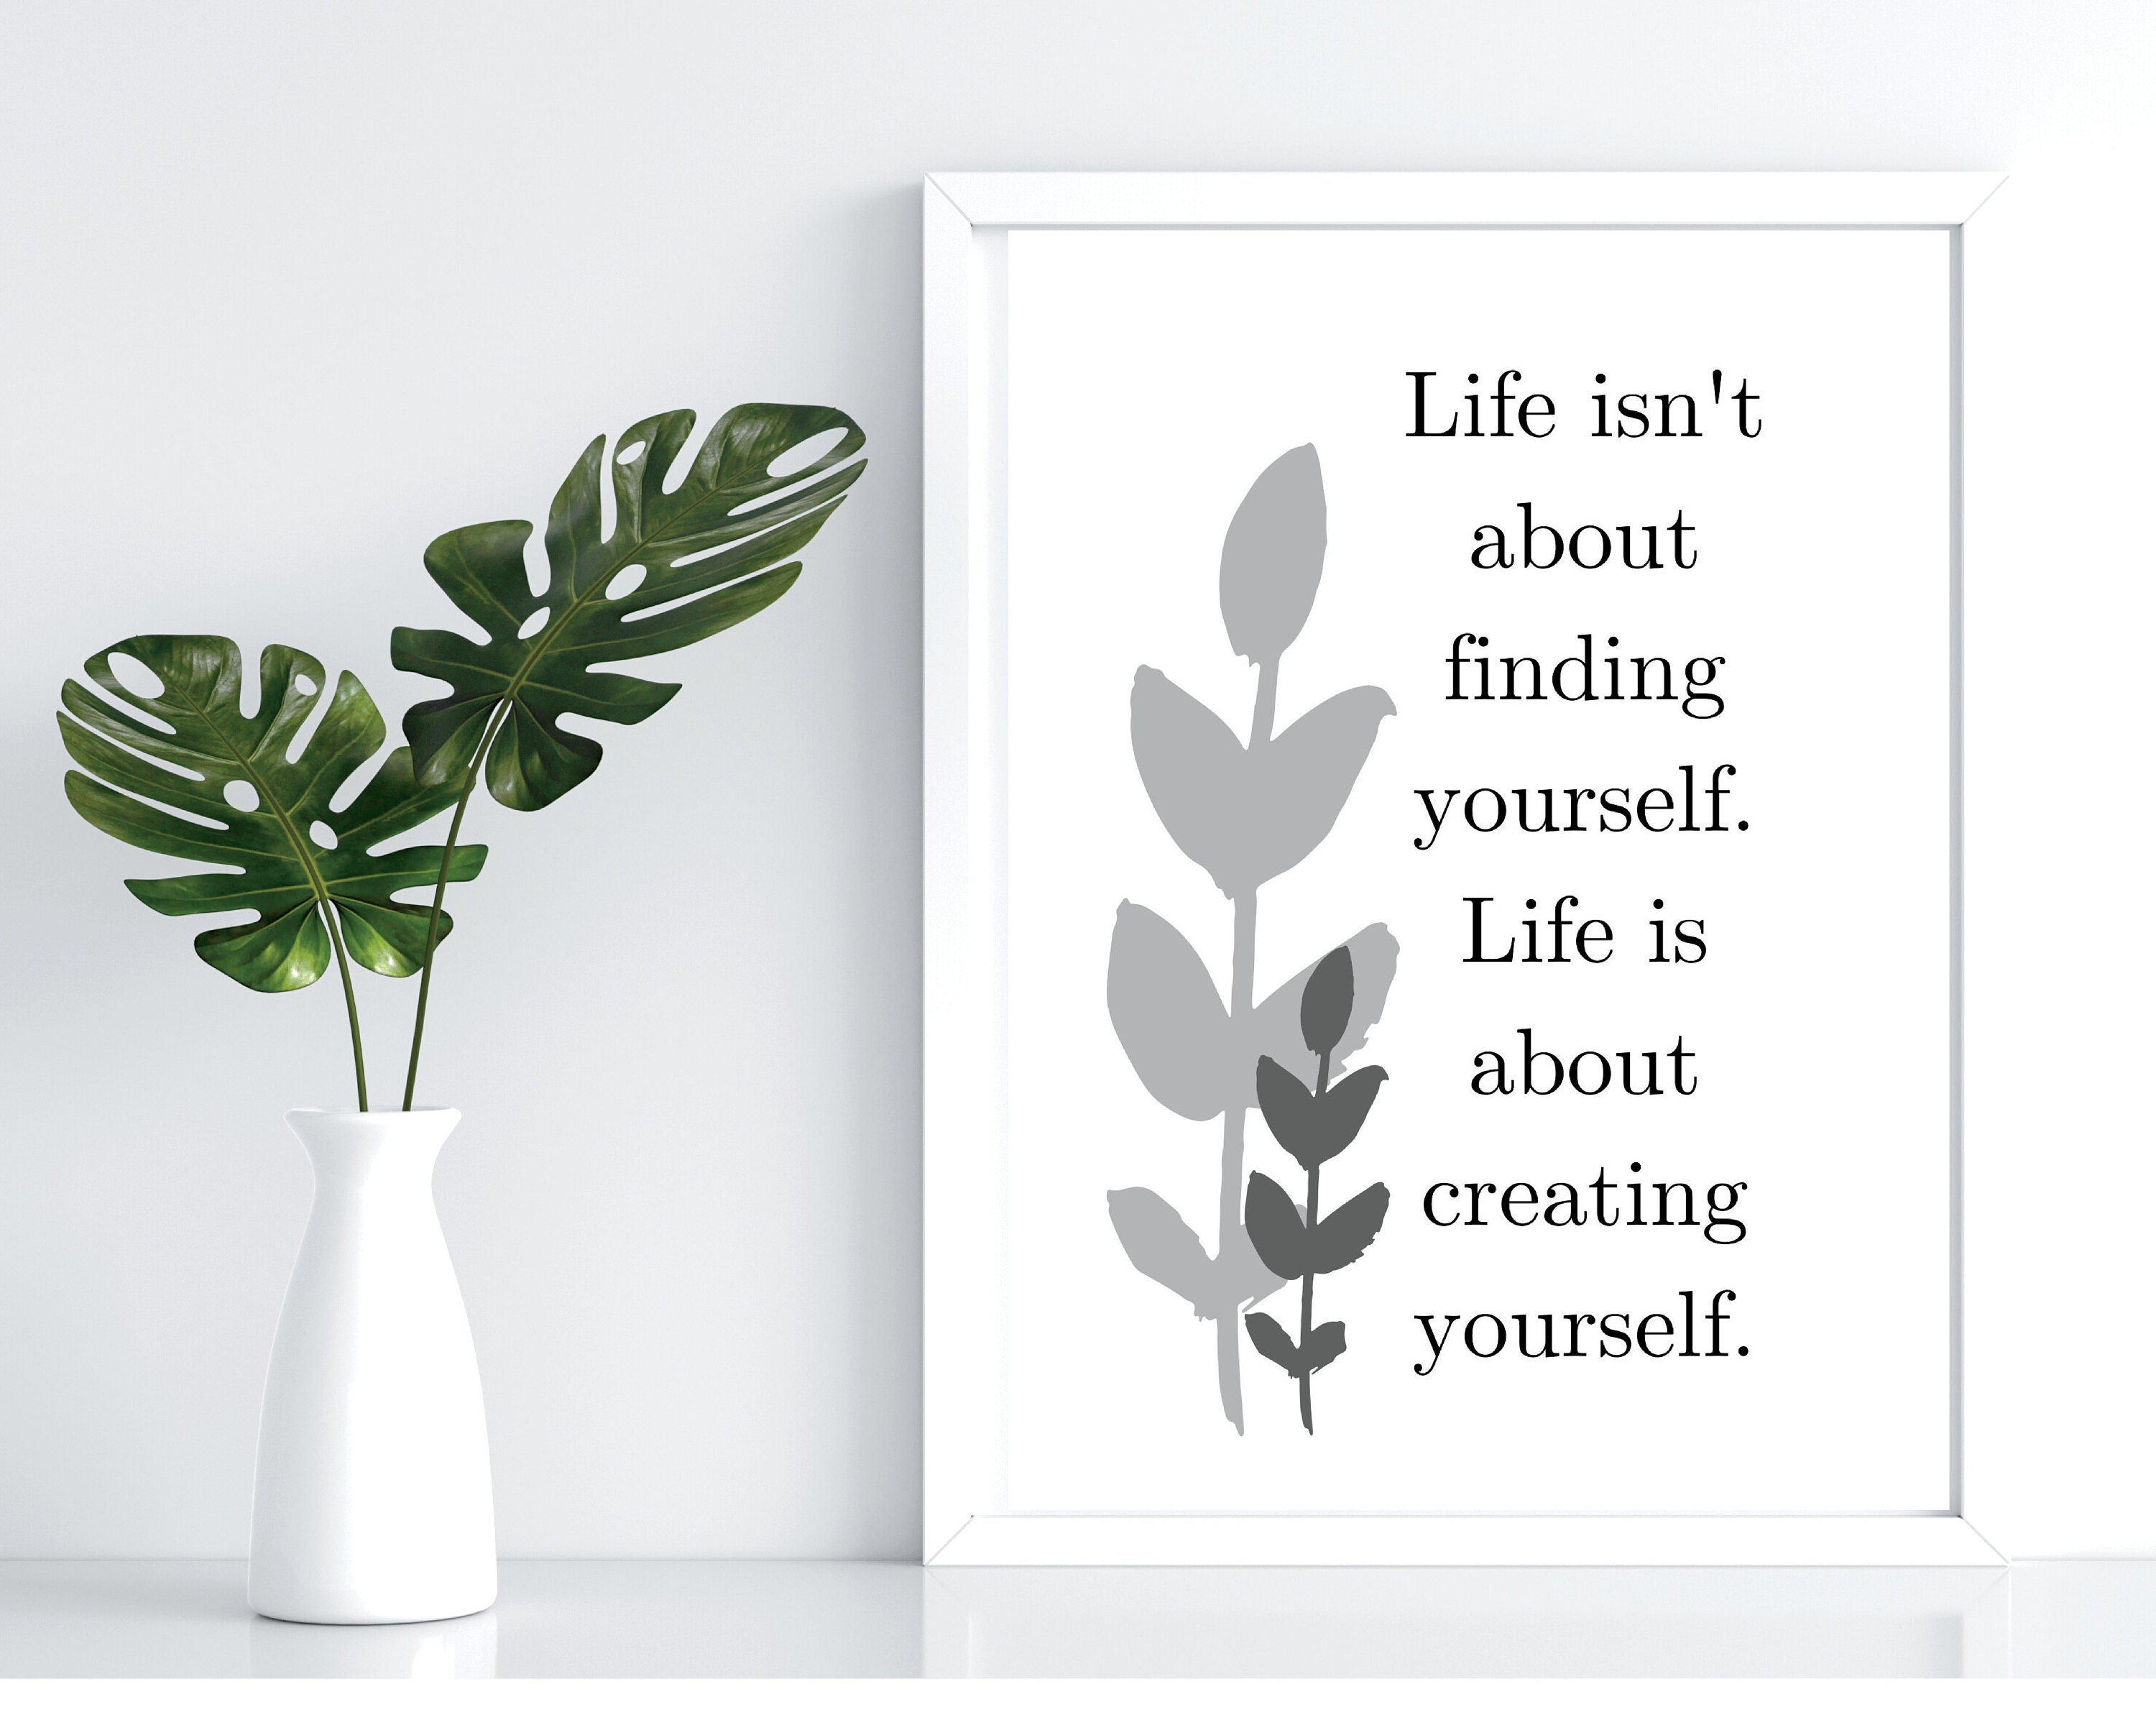 Brainy Quotes About Life by Yogi Berra and Elizabeth Taylor - Etsy